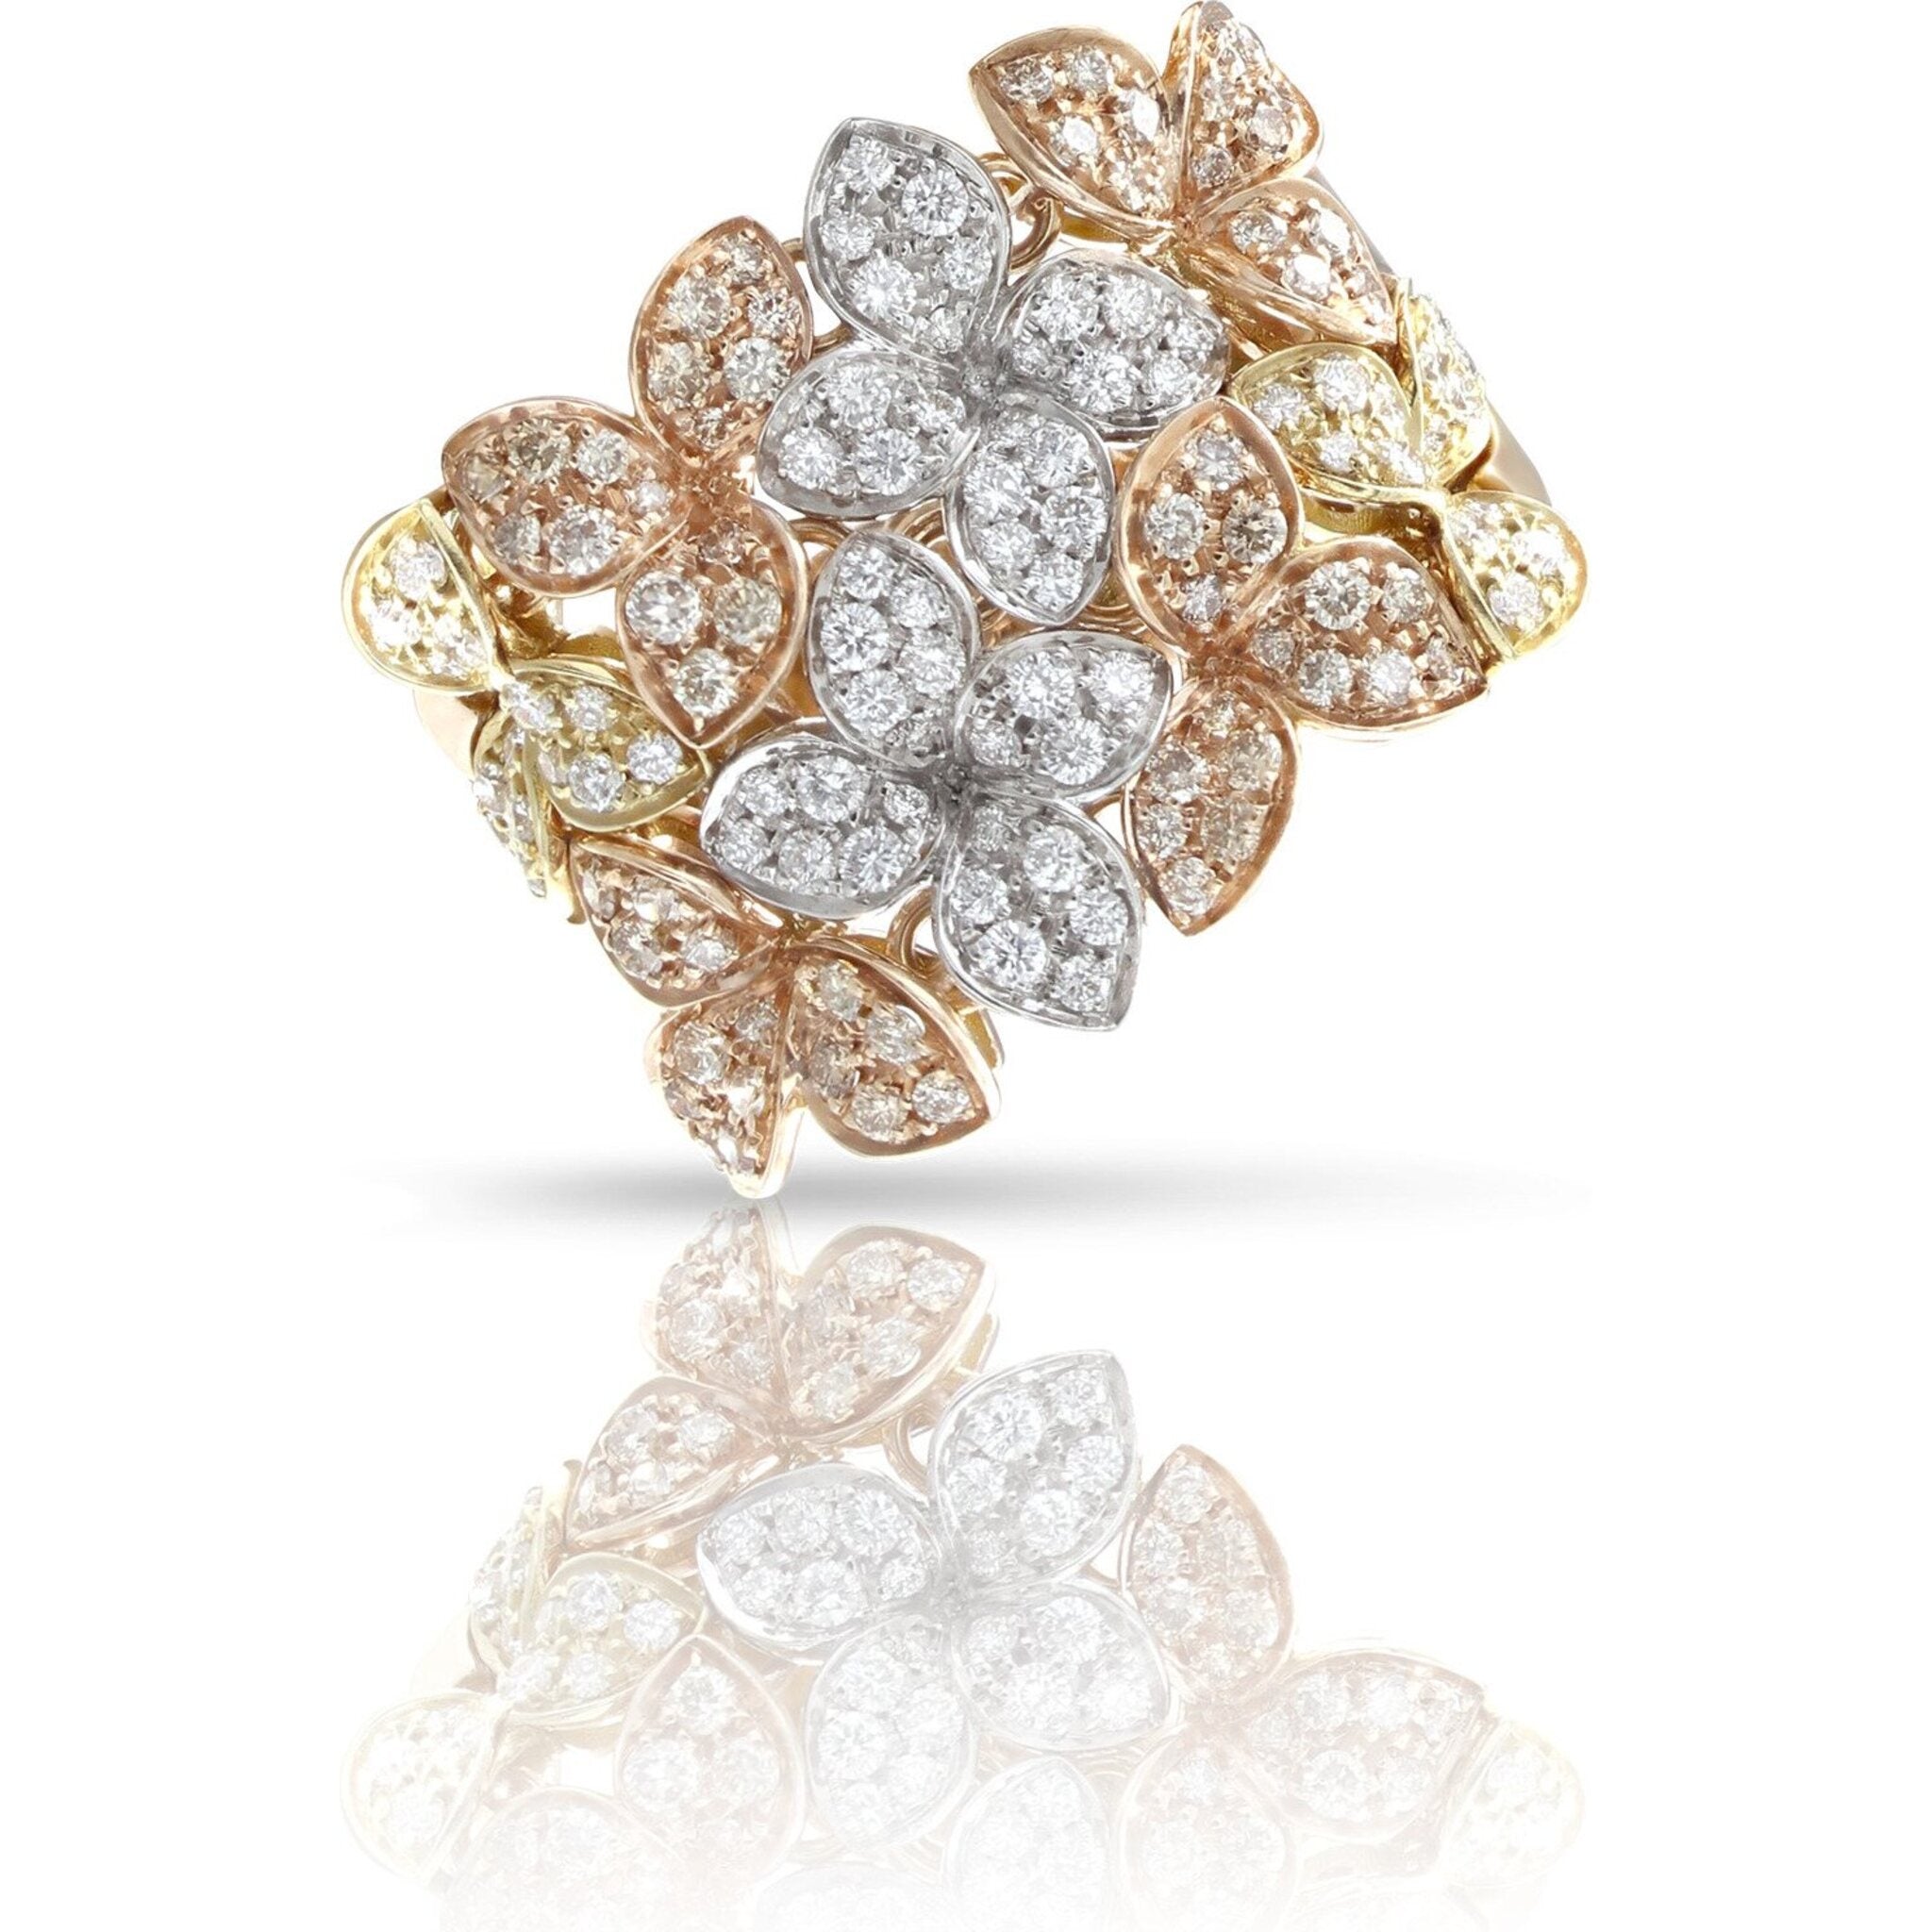 Pasquale Bruni - Ama XL Ring in 18K Rose, White and Yellow Gold with White and Champagne Diamonds 16 / Size 7.5 US